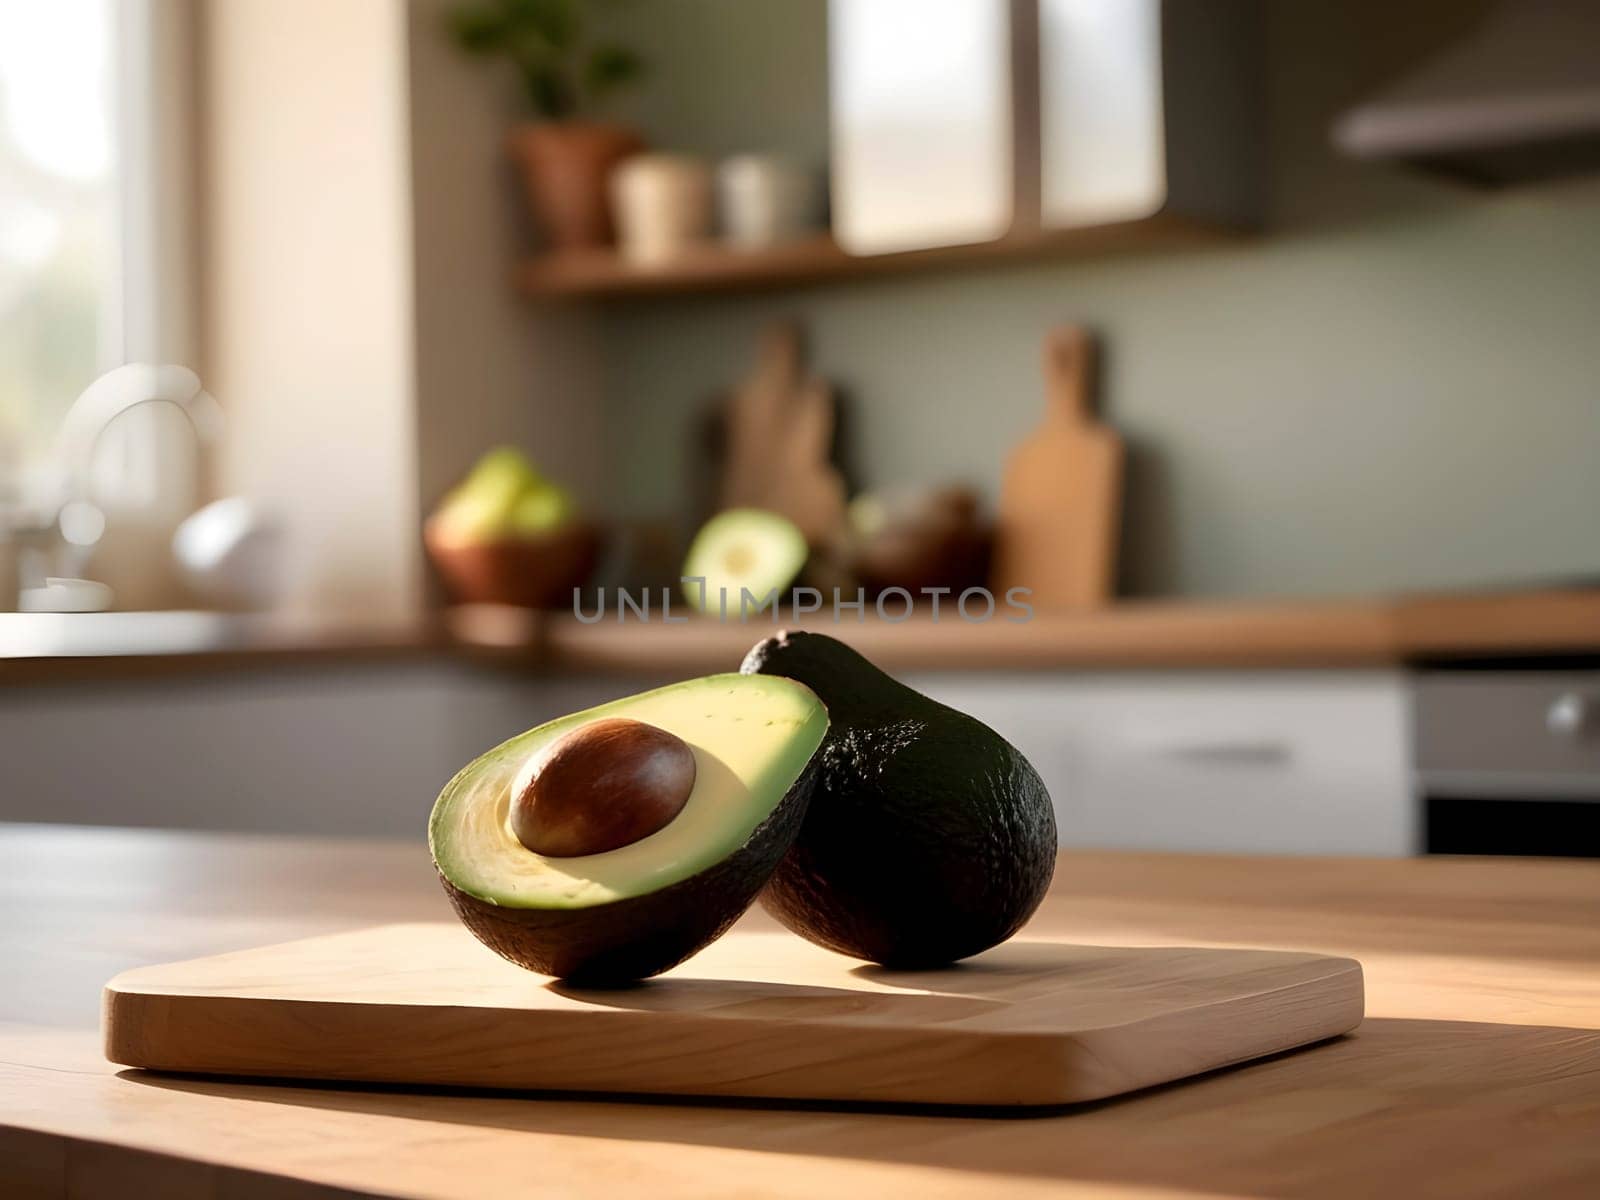 Chic Culinary Scene: Afternoon Sunlight Accentuating Avocado on Wooden Surface by mailos